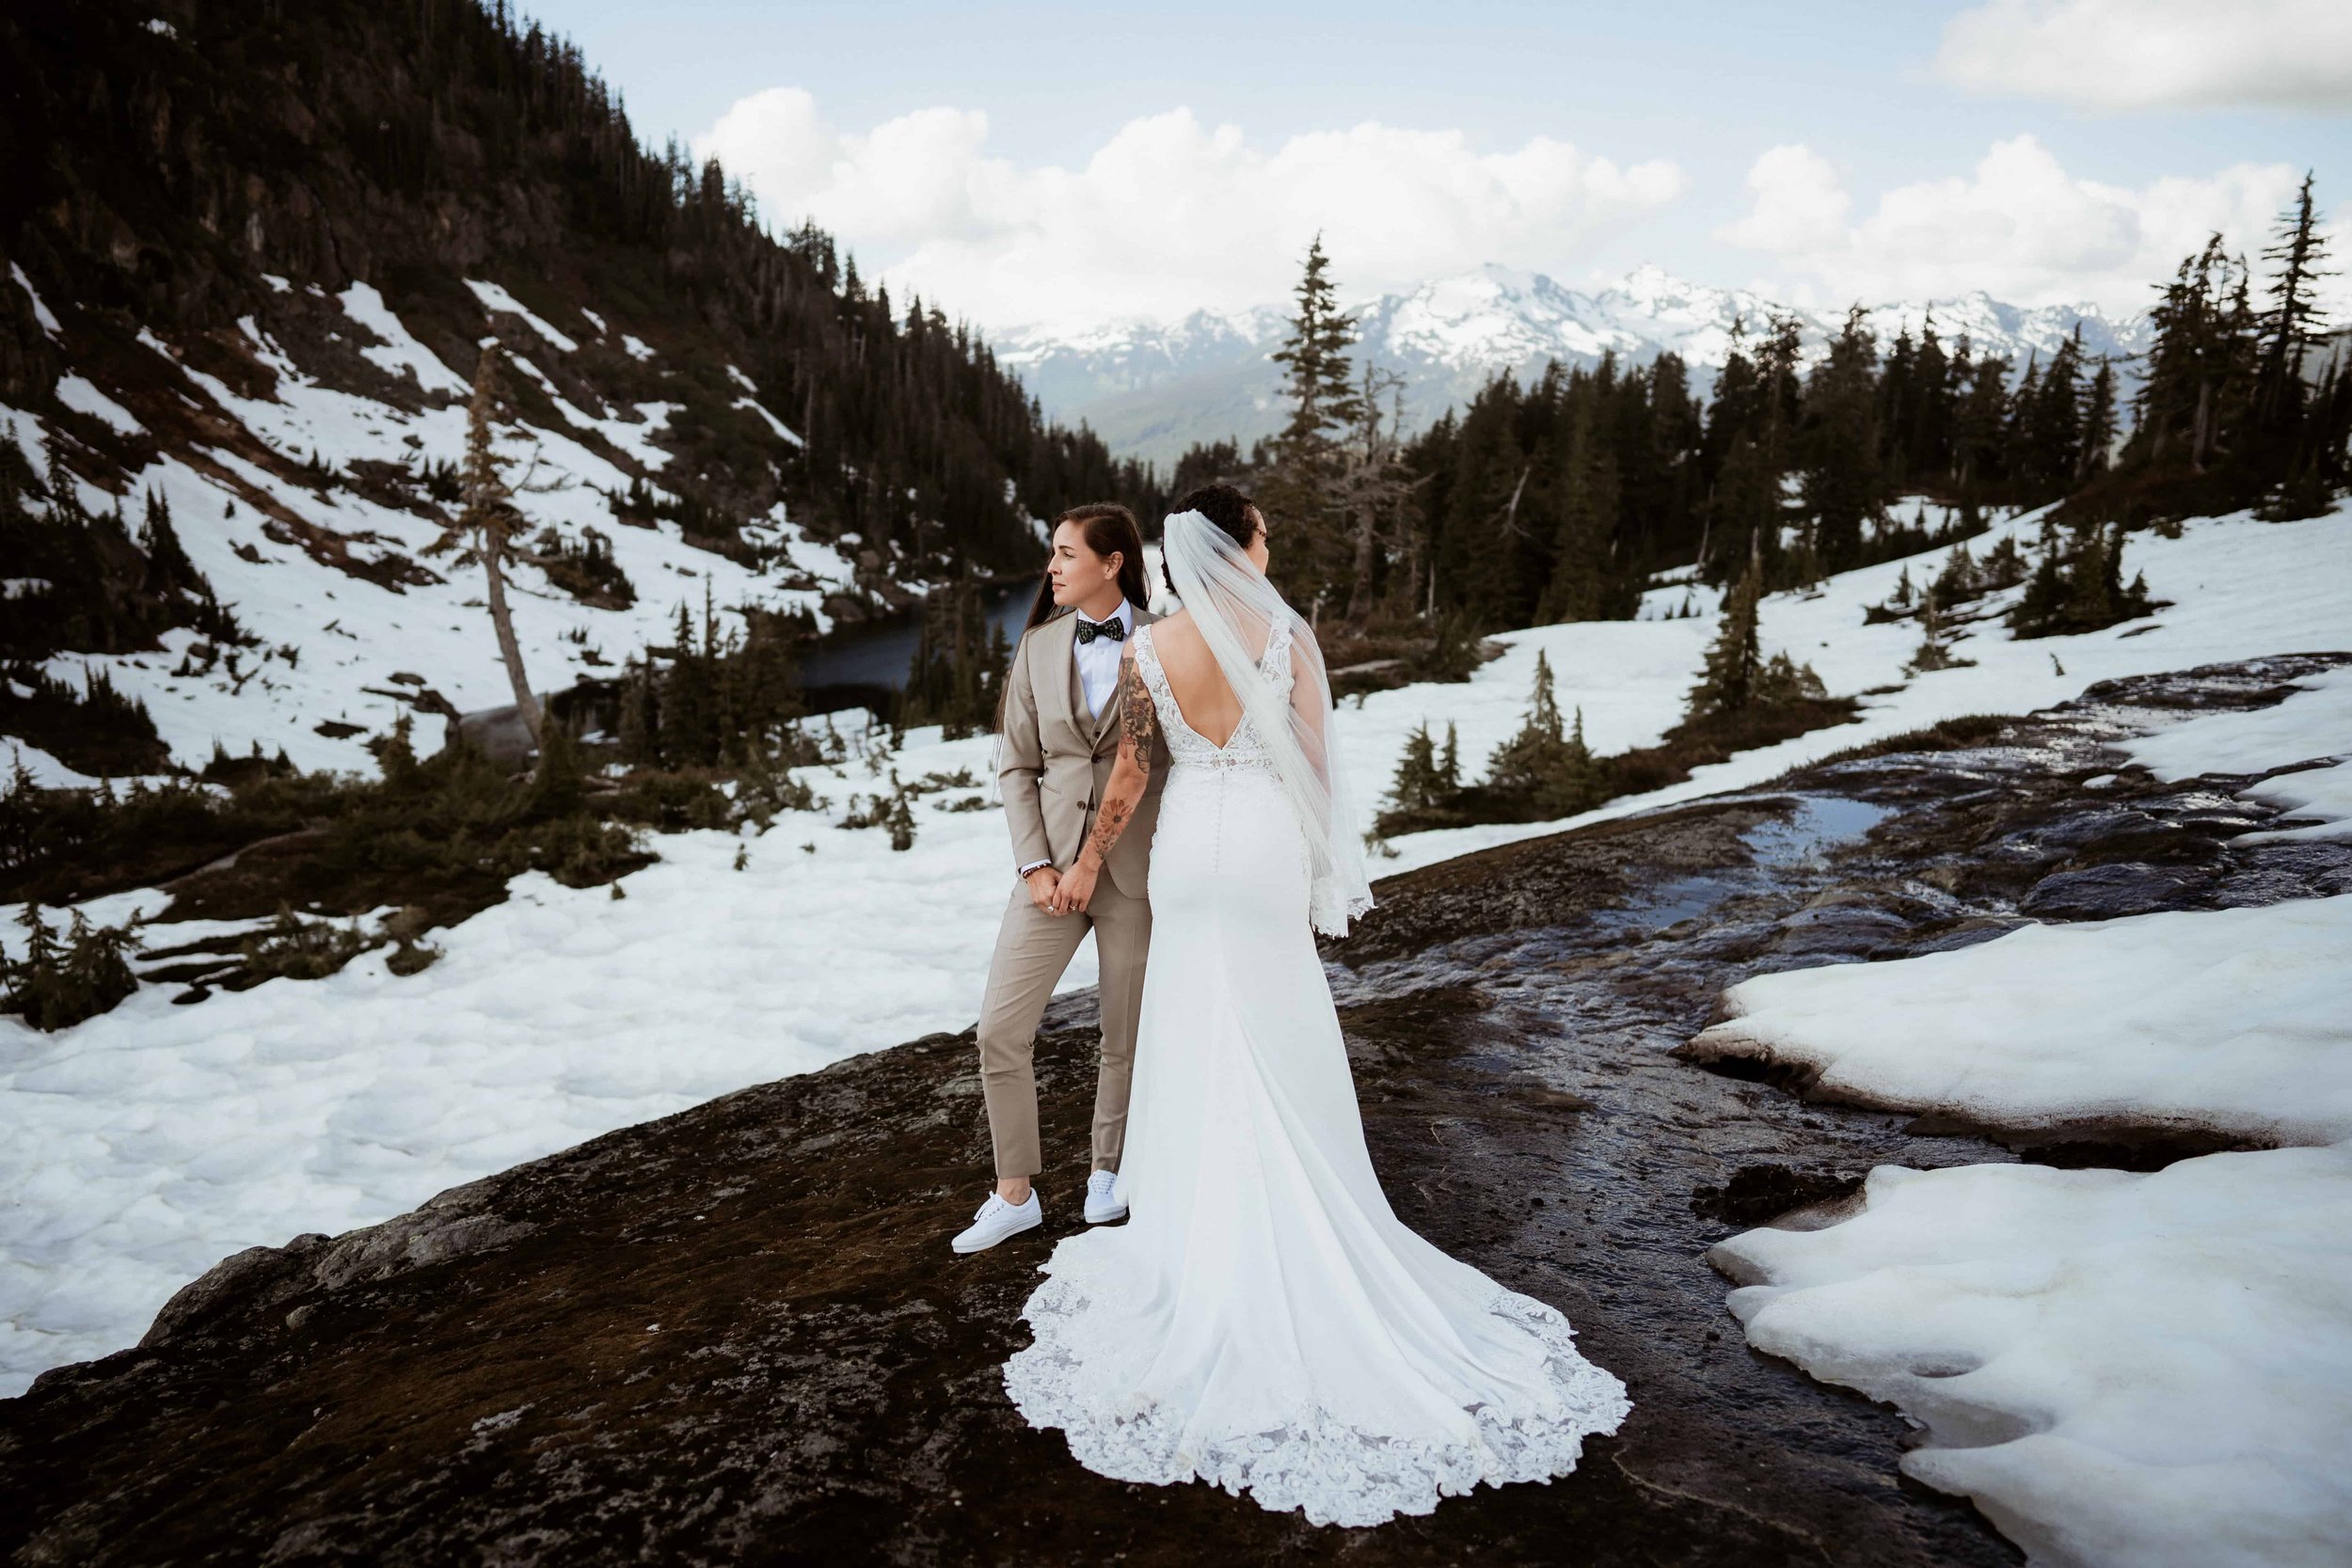 Private Elopement Vows in the North Cascades